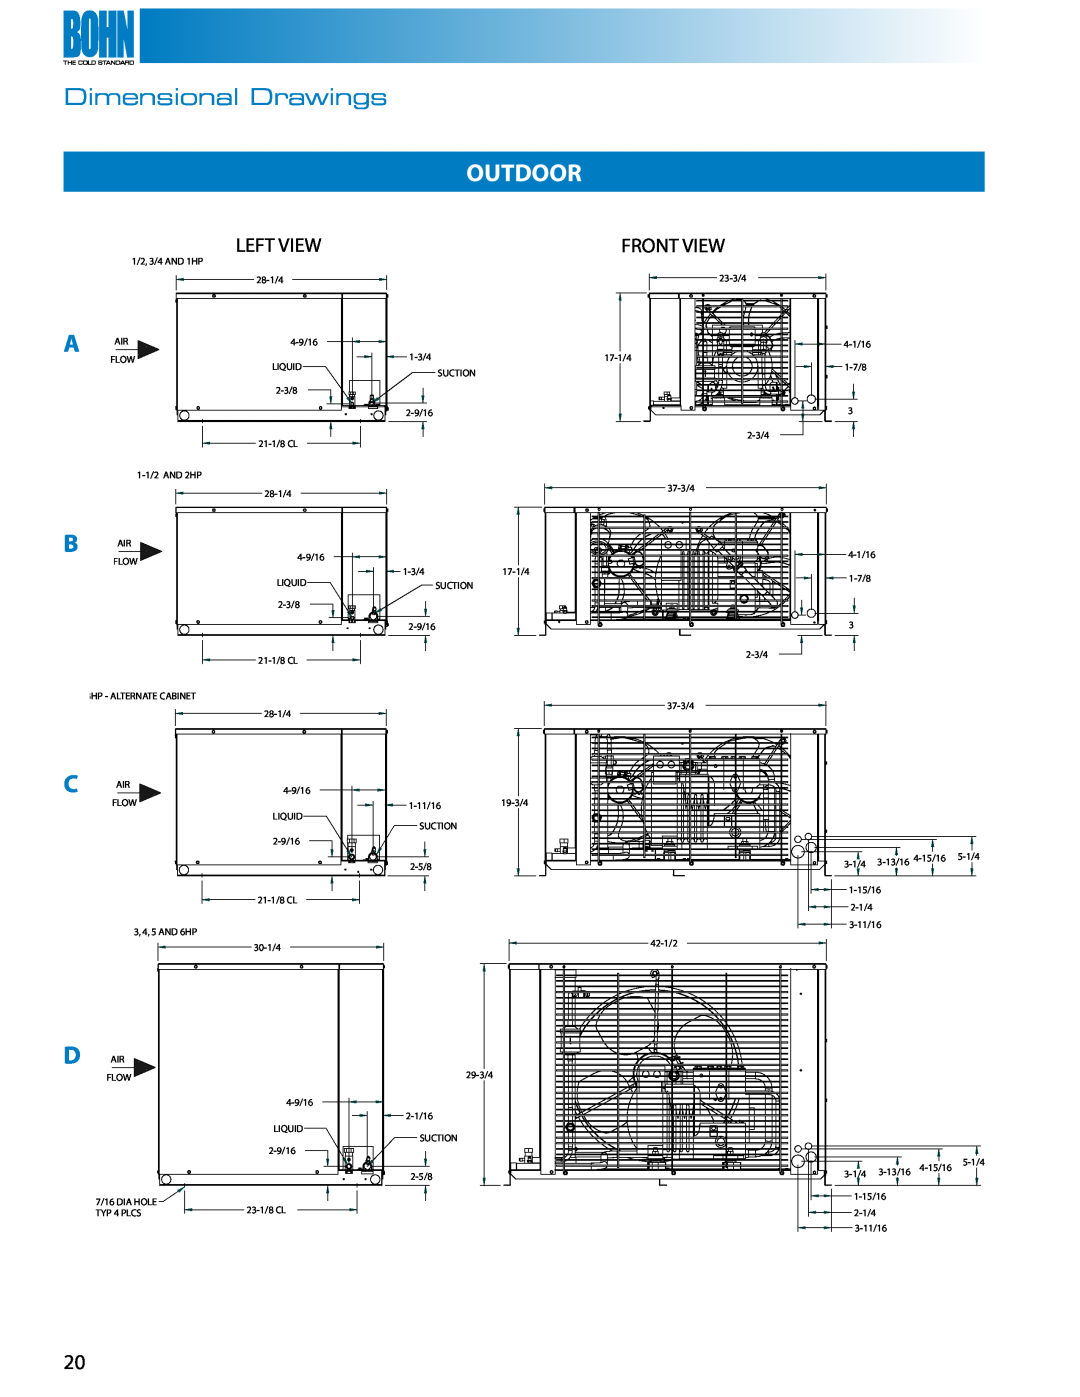 Heatcraft Refrigeration Products Air-Cooled Condensing Units manual Outdoor, Dimensional Drawings, Suction, 29-3/4 